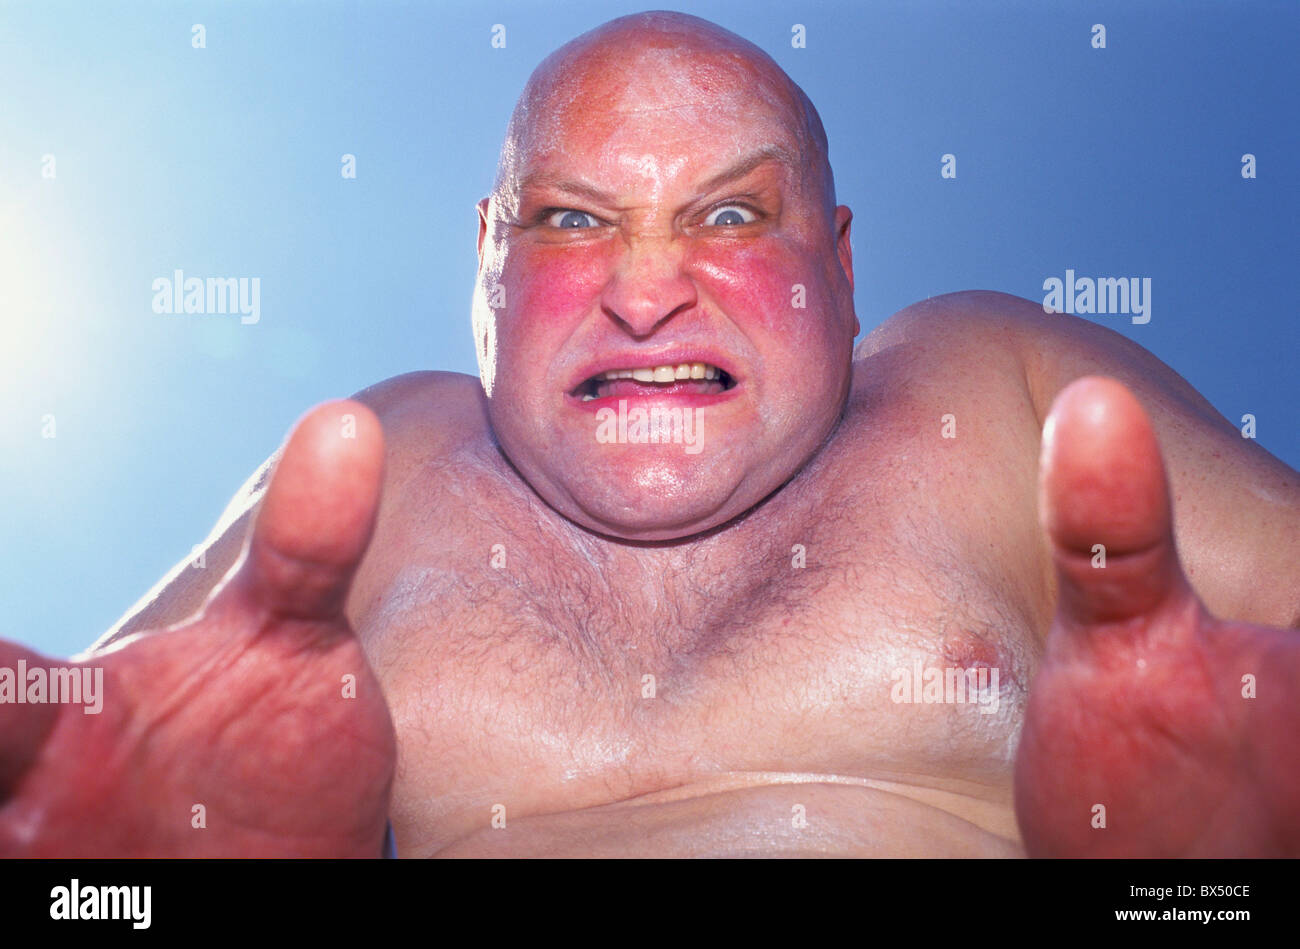 An obese, sweaty bald man poses for a picture at the Urban Games. Stock Photo